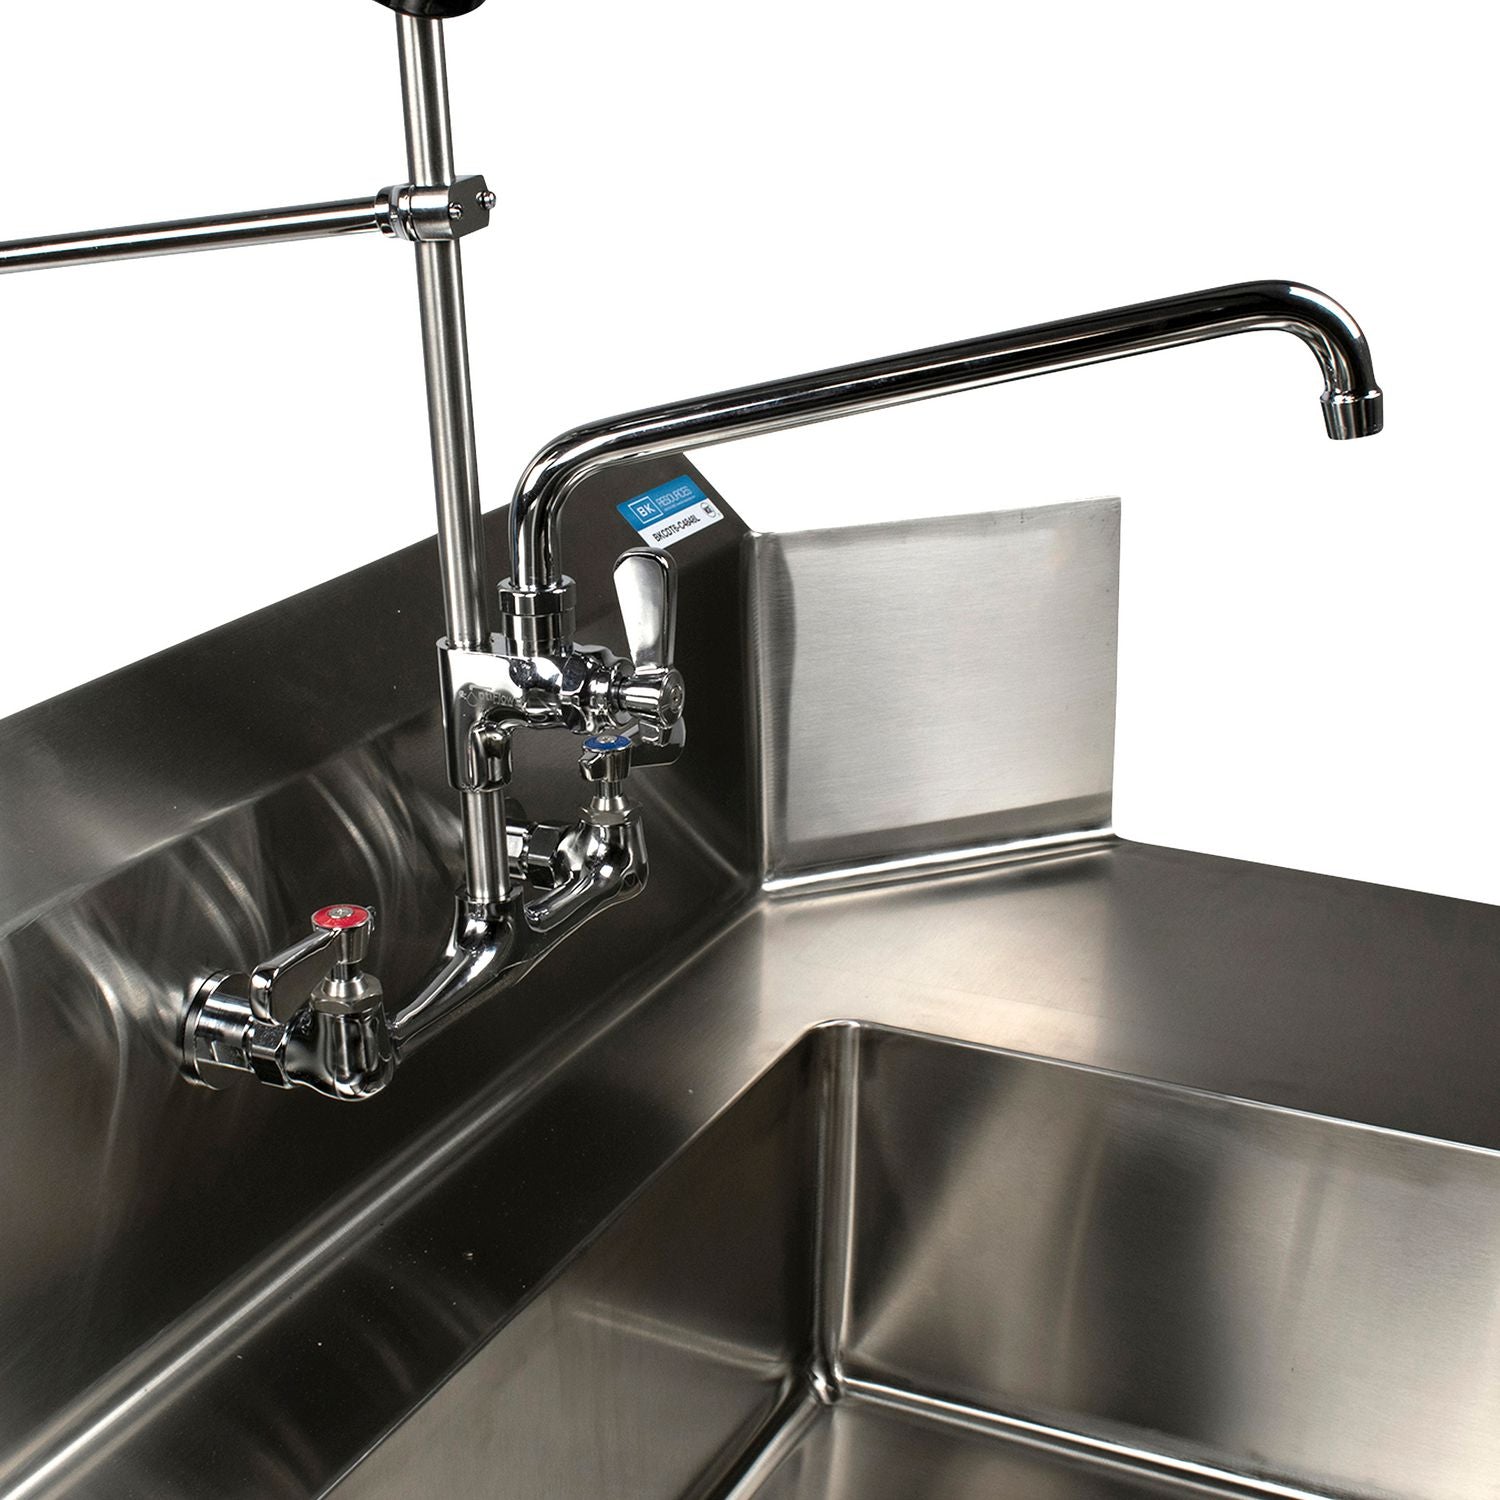 workforce-prerinse-add-a-faucet-462-height-12-reach-chrome-ships-in-4-6-business-days_bkevsmpraf12m - 3